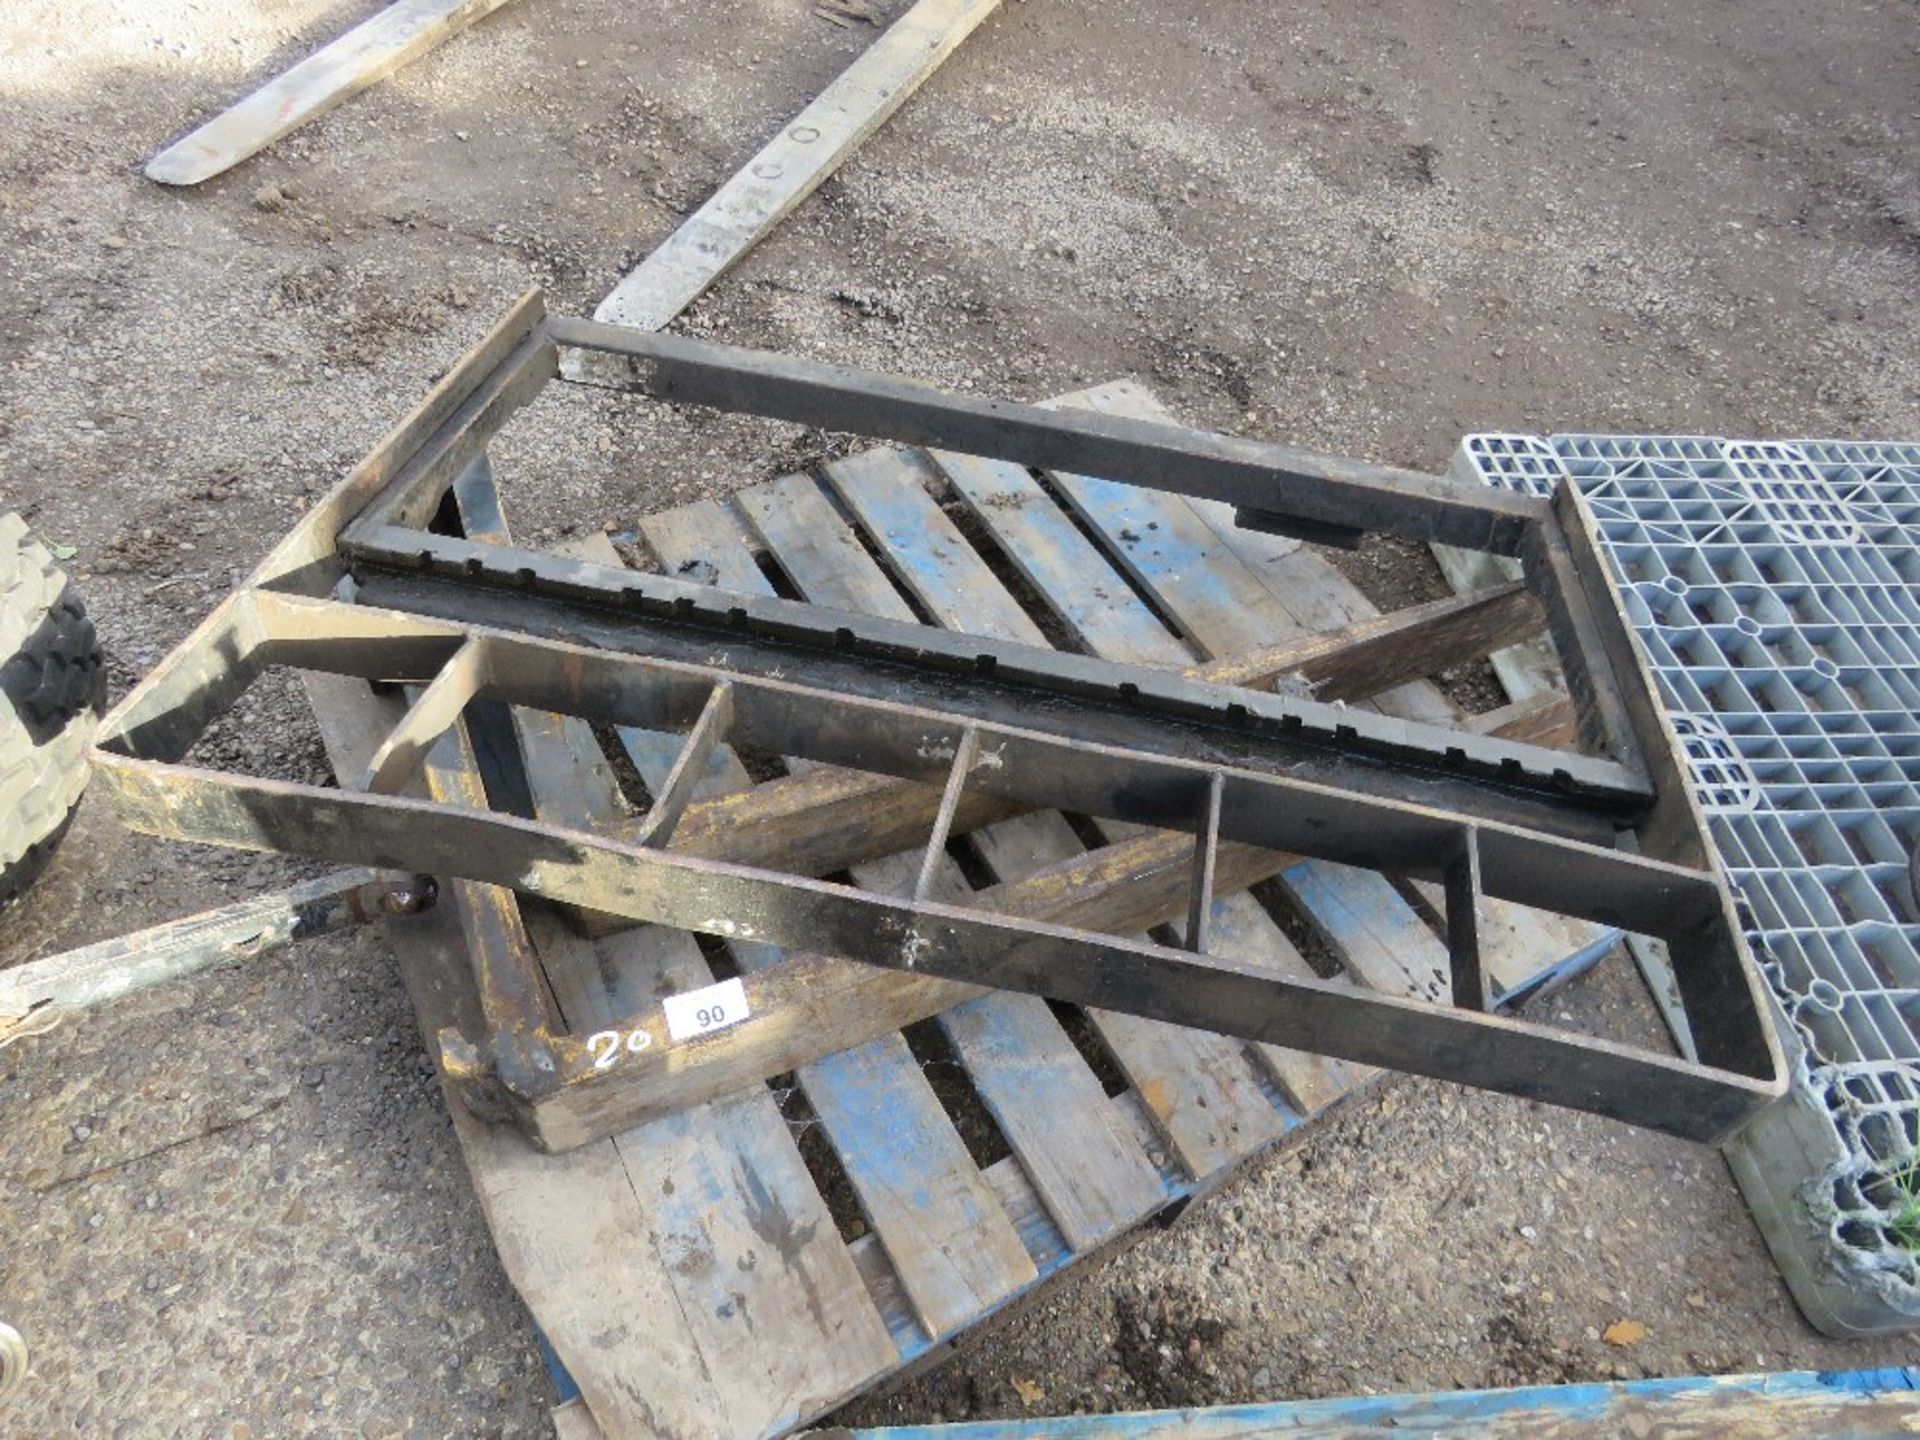 FORKLIFT BACKPLATE WITH FORKS, 20" CARRIAGE.